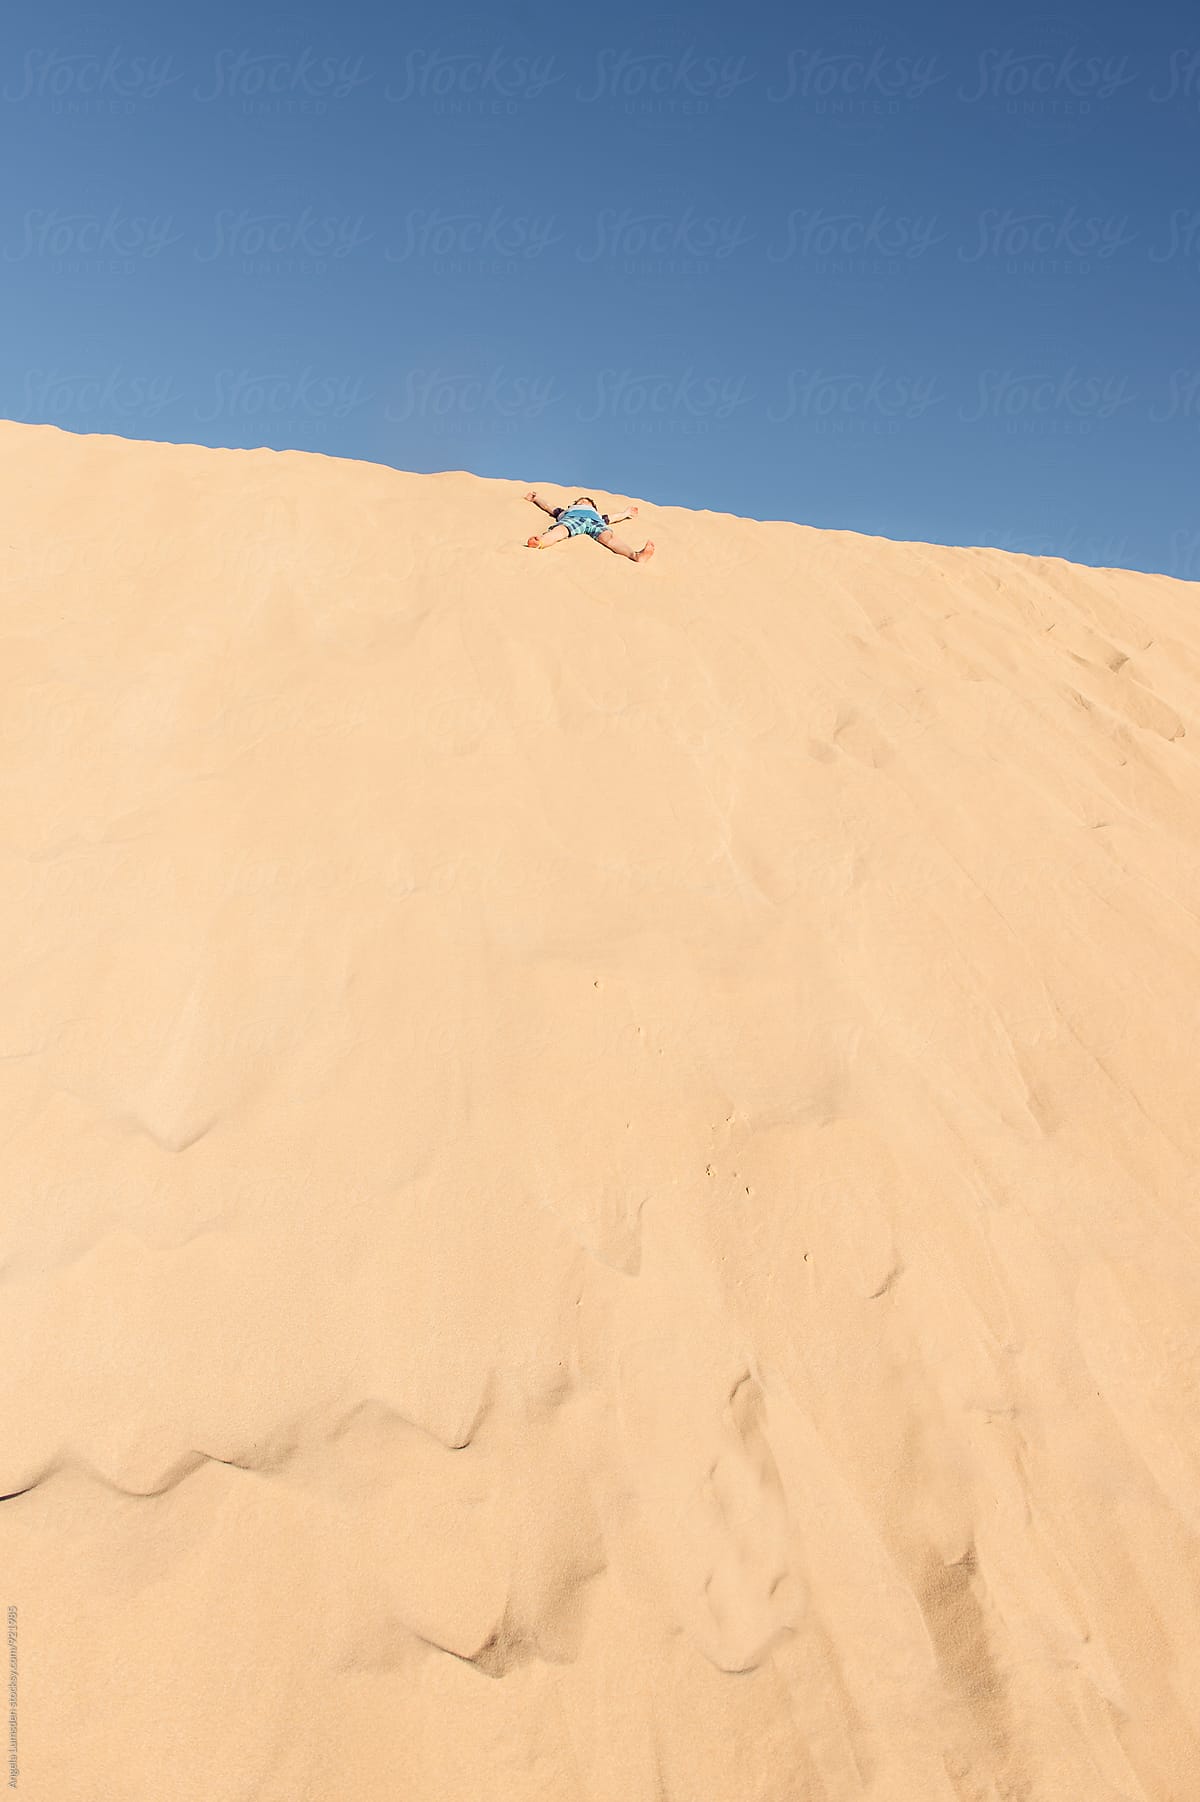 Boy doing a sand angel at the top of a large sand dune against a blue sky